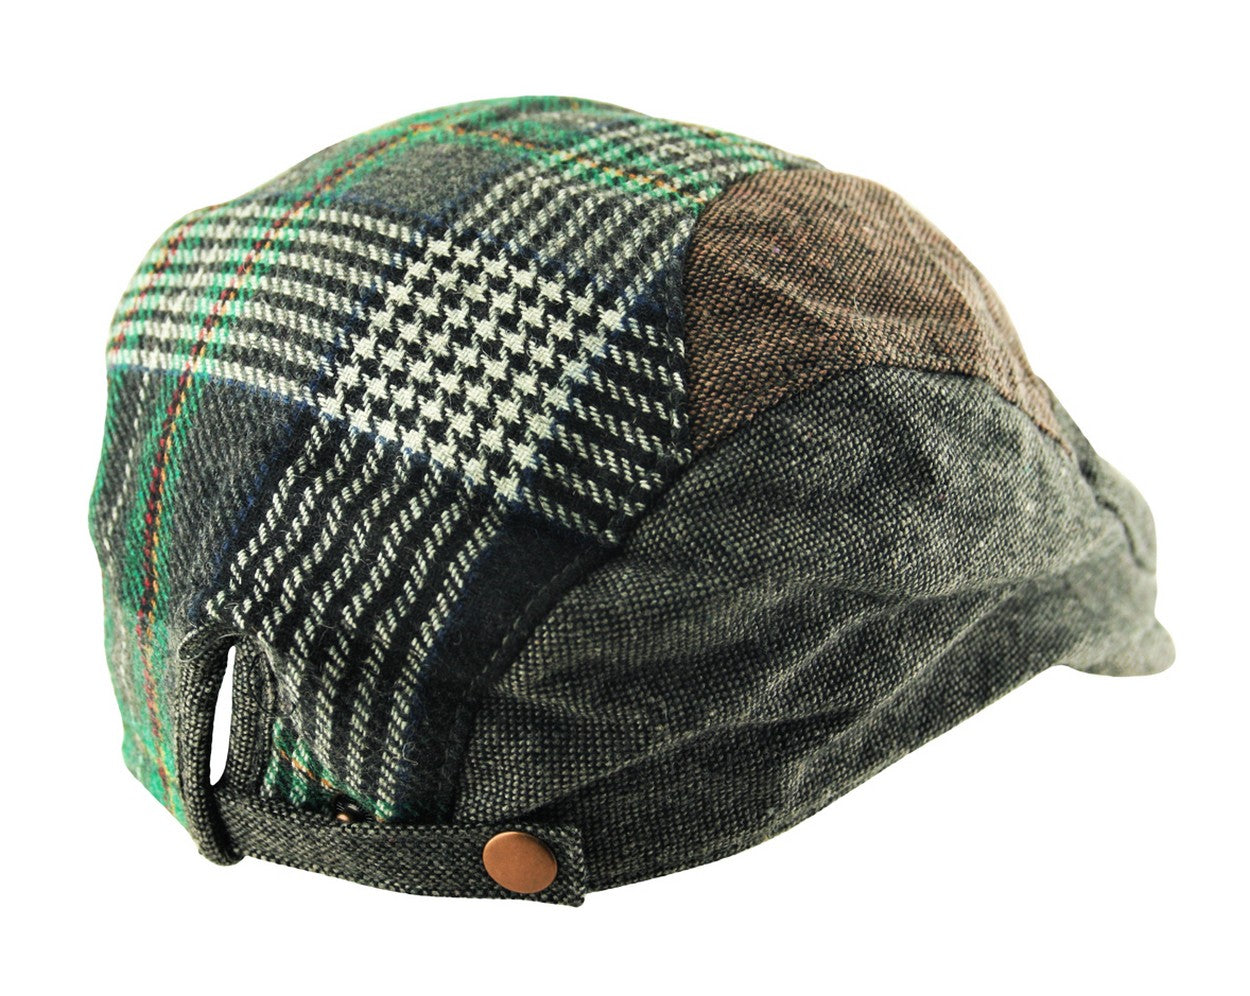 Mens Cotton Check Tweed Houndstooth Flat Cap Golf Baker Boy in Grey and Green